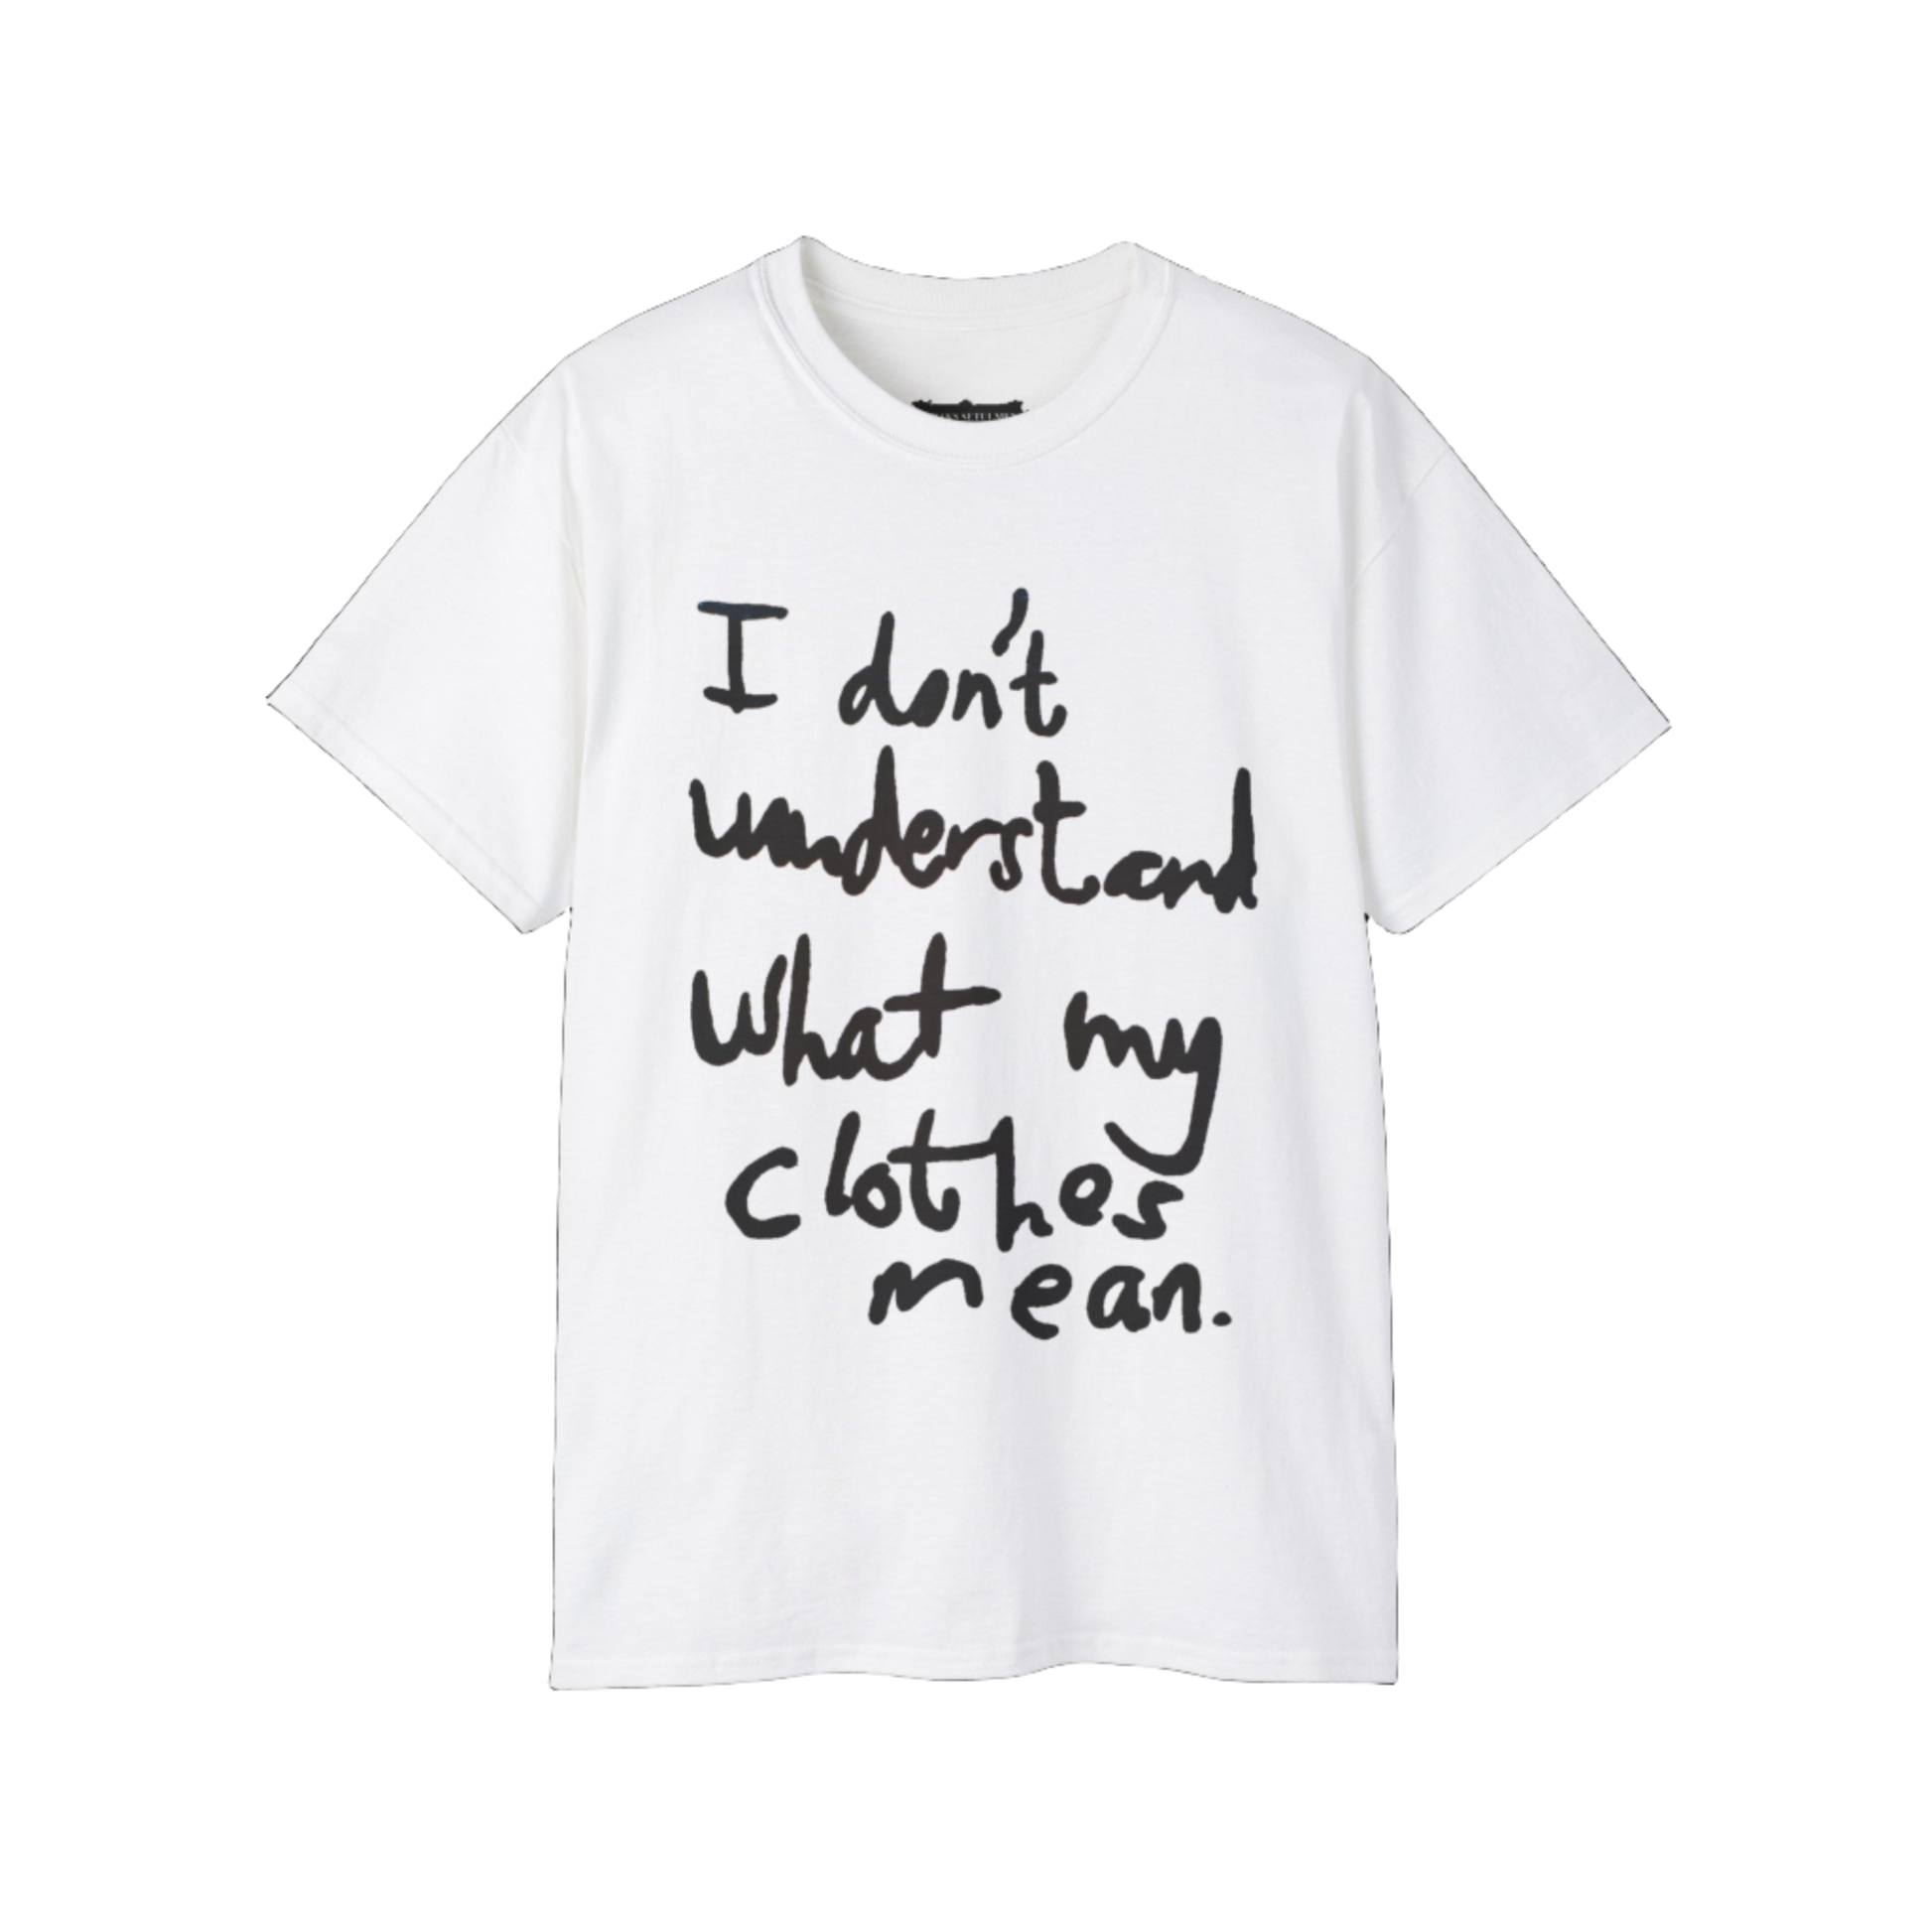 White tee w/ black text, "I don't understand what my clothes mean."